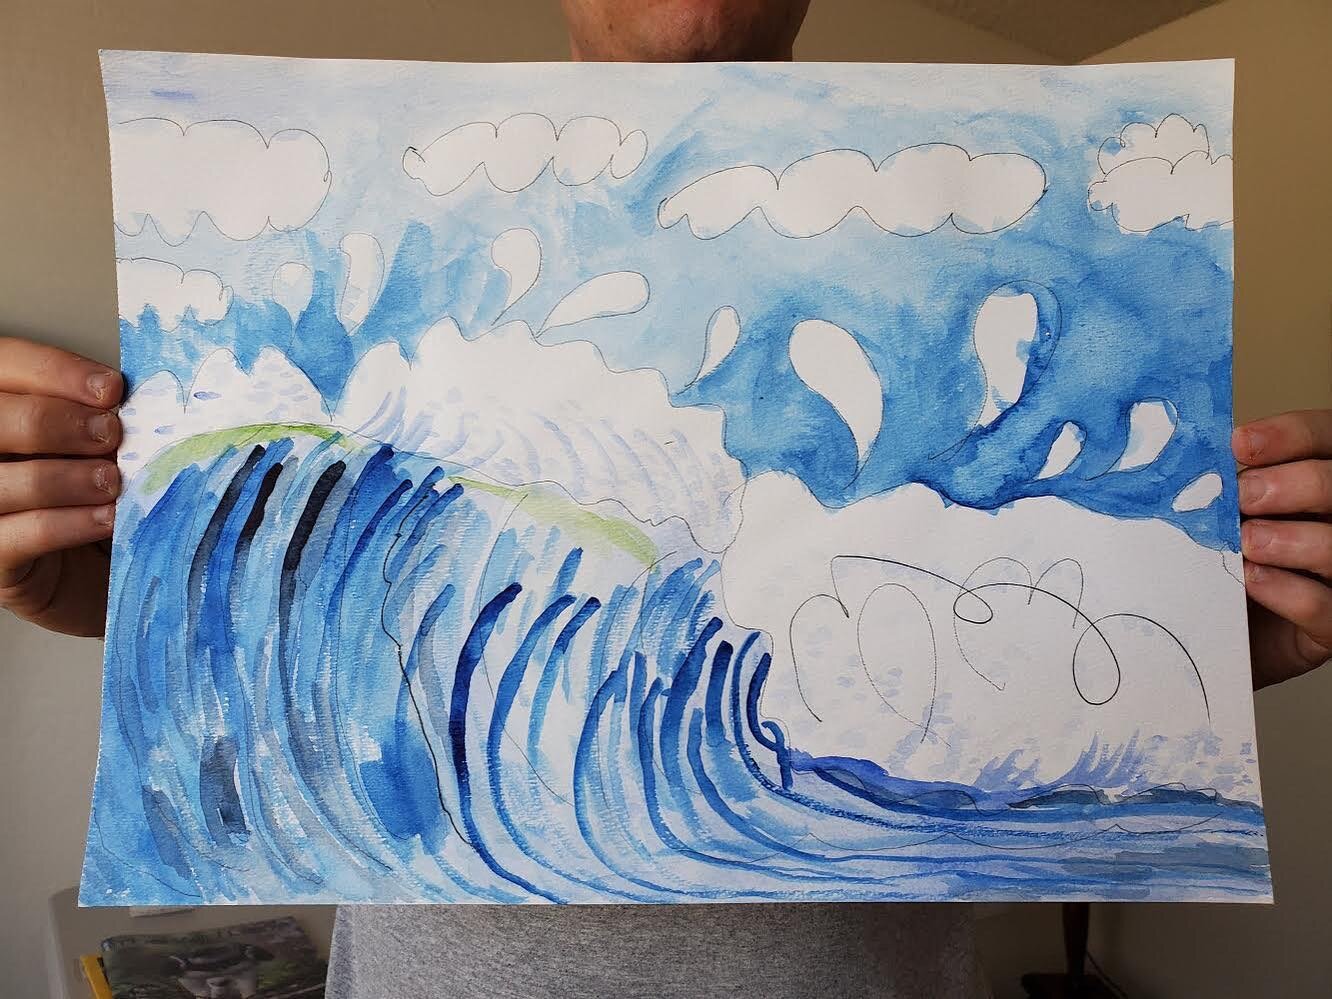 Here is a recent piece by artist Zach Mabert!
&ldquo;Big Wave,&rdquo; watercolor on paper. On working with Zach, Instructor Autumn says &ldquo;Working with Zach is really fun - not only has he shown interest in one of my favorite mediums, but he is a